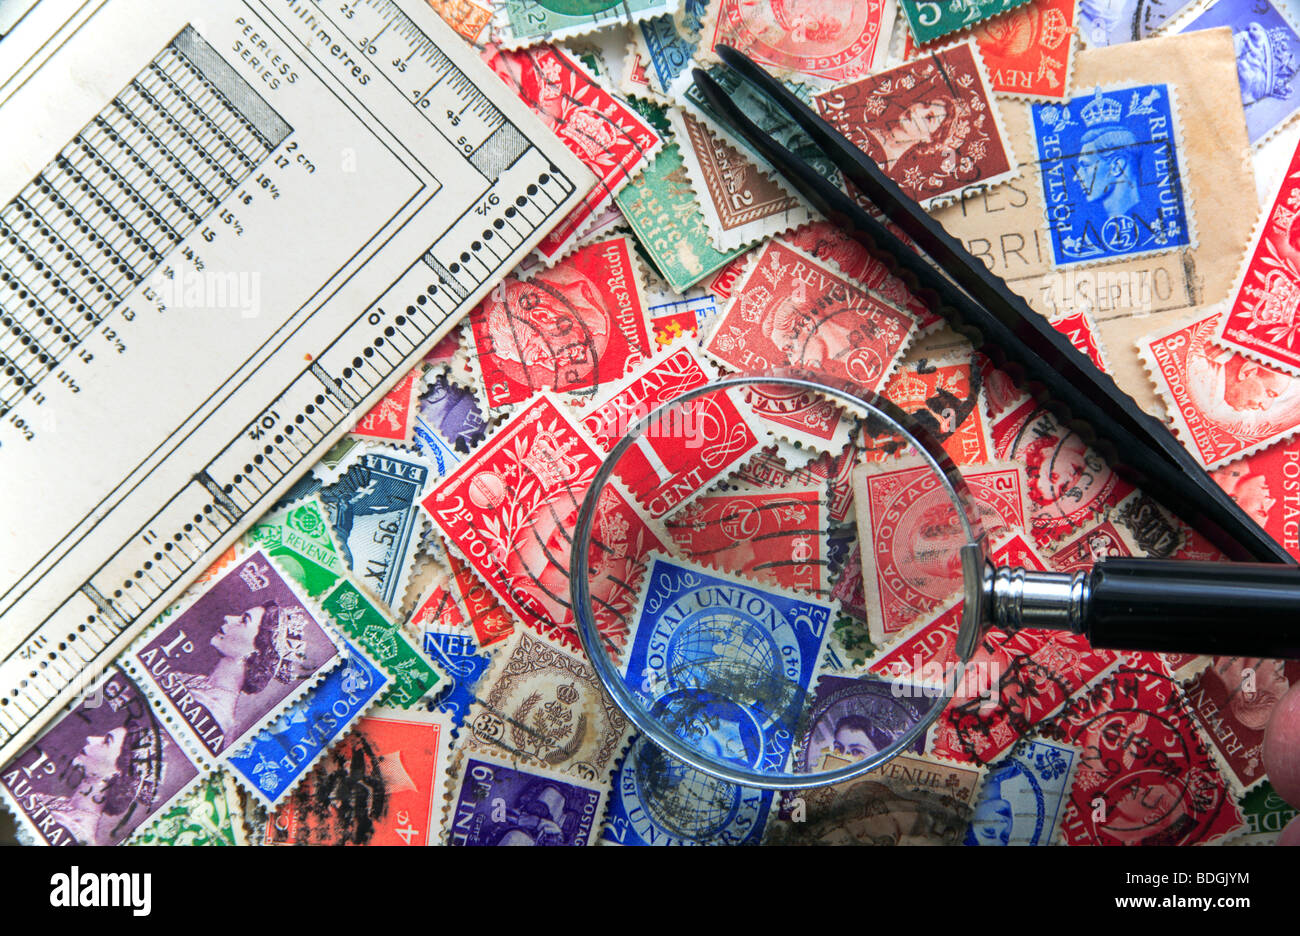 Stamp Collecting editorial stock image. Image of collect - 3894519